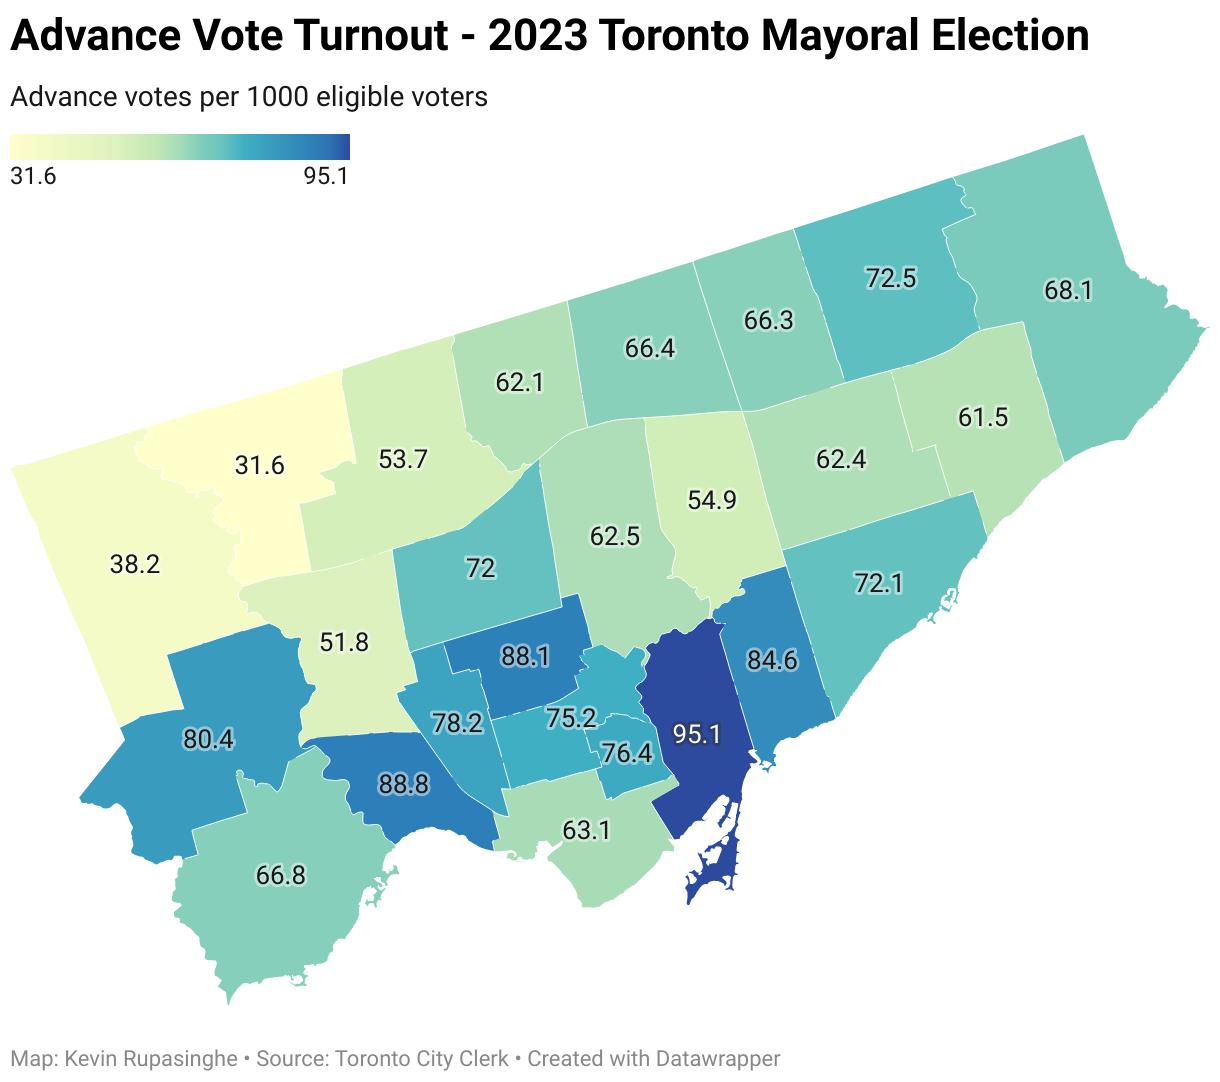 A map showing advance vote turnout by ward, per 1,000 eligible voters